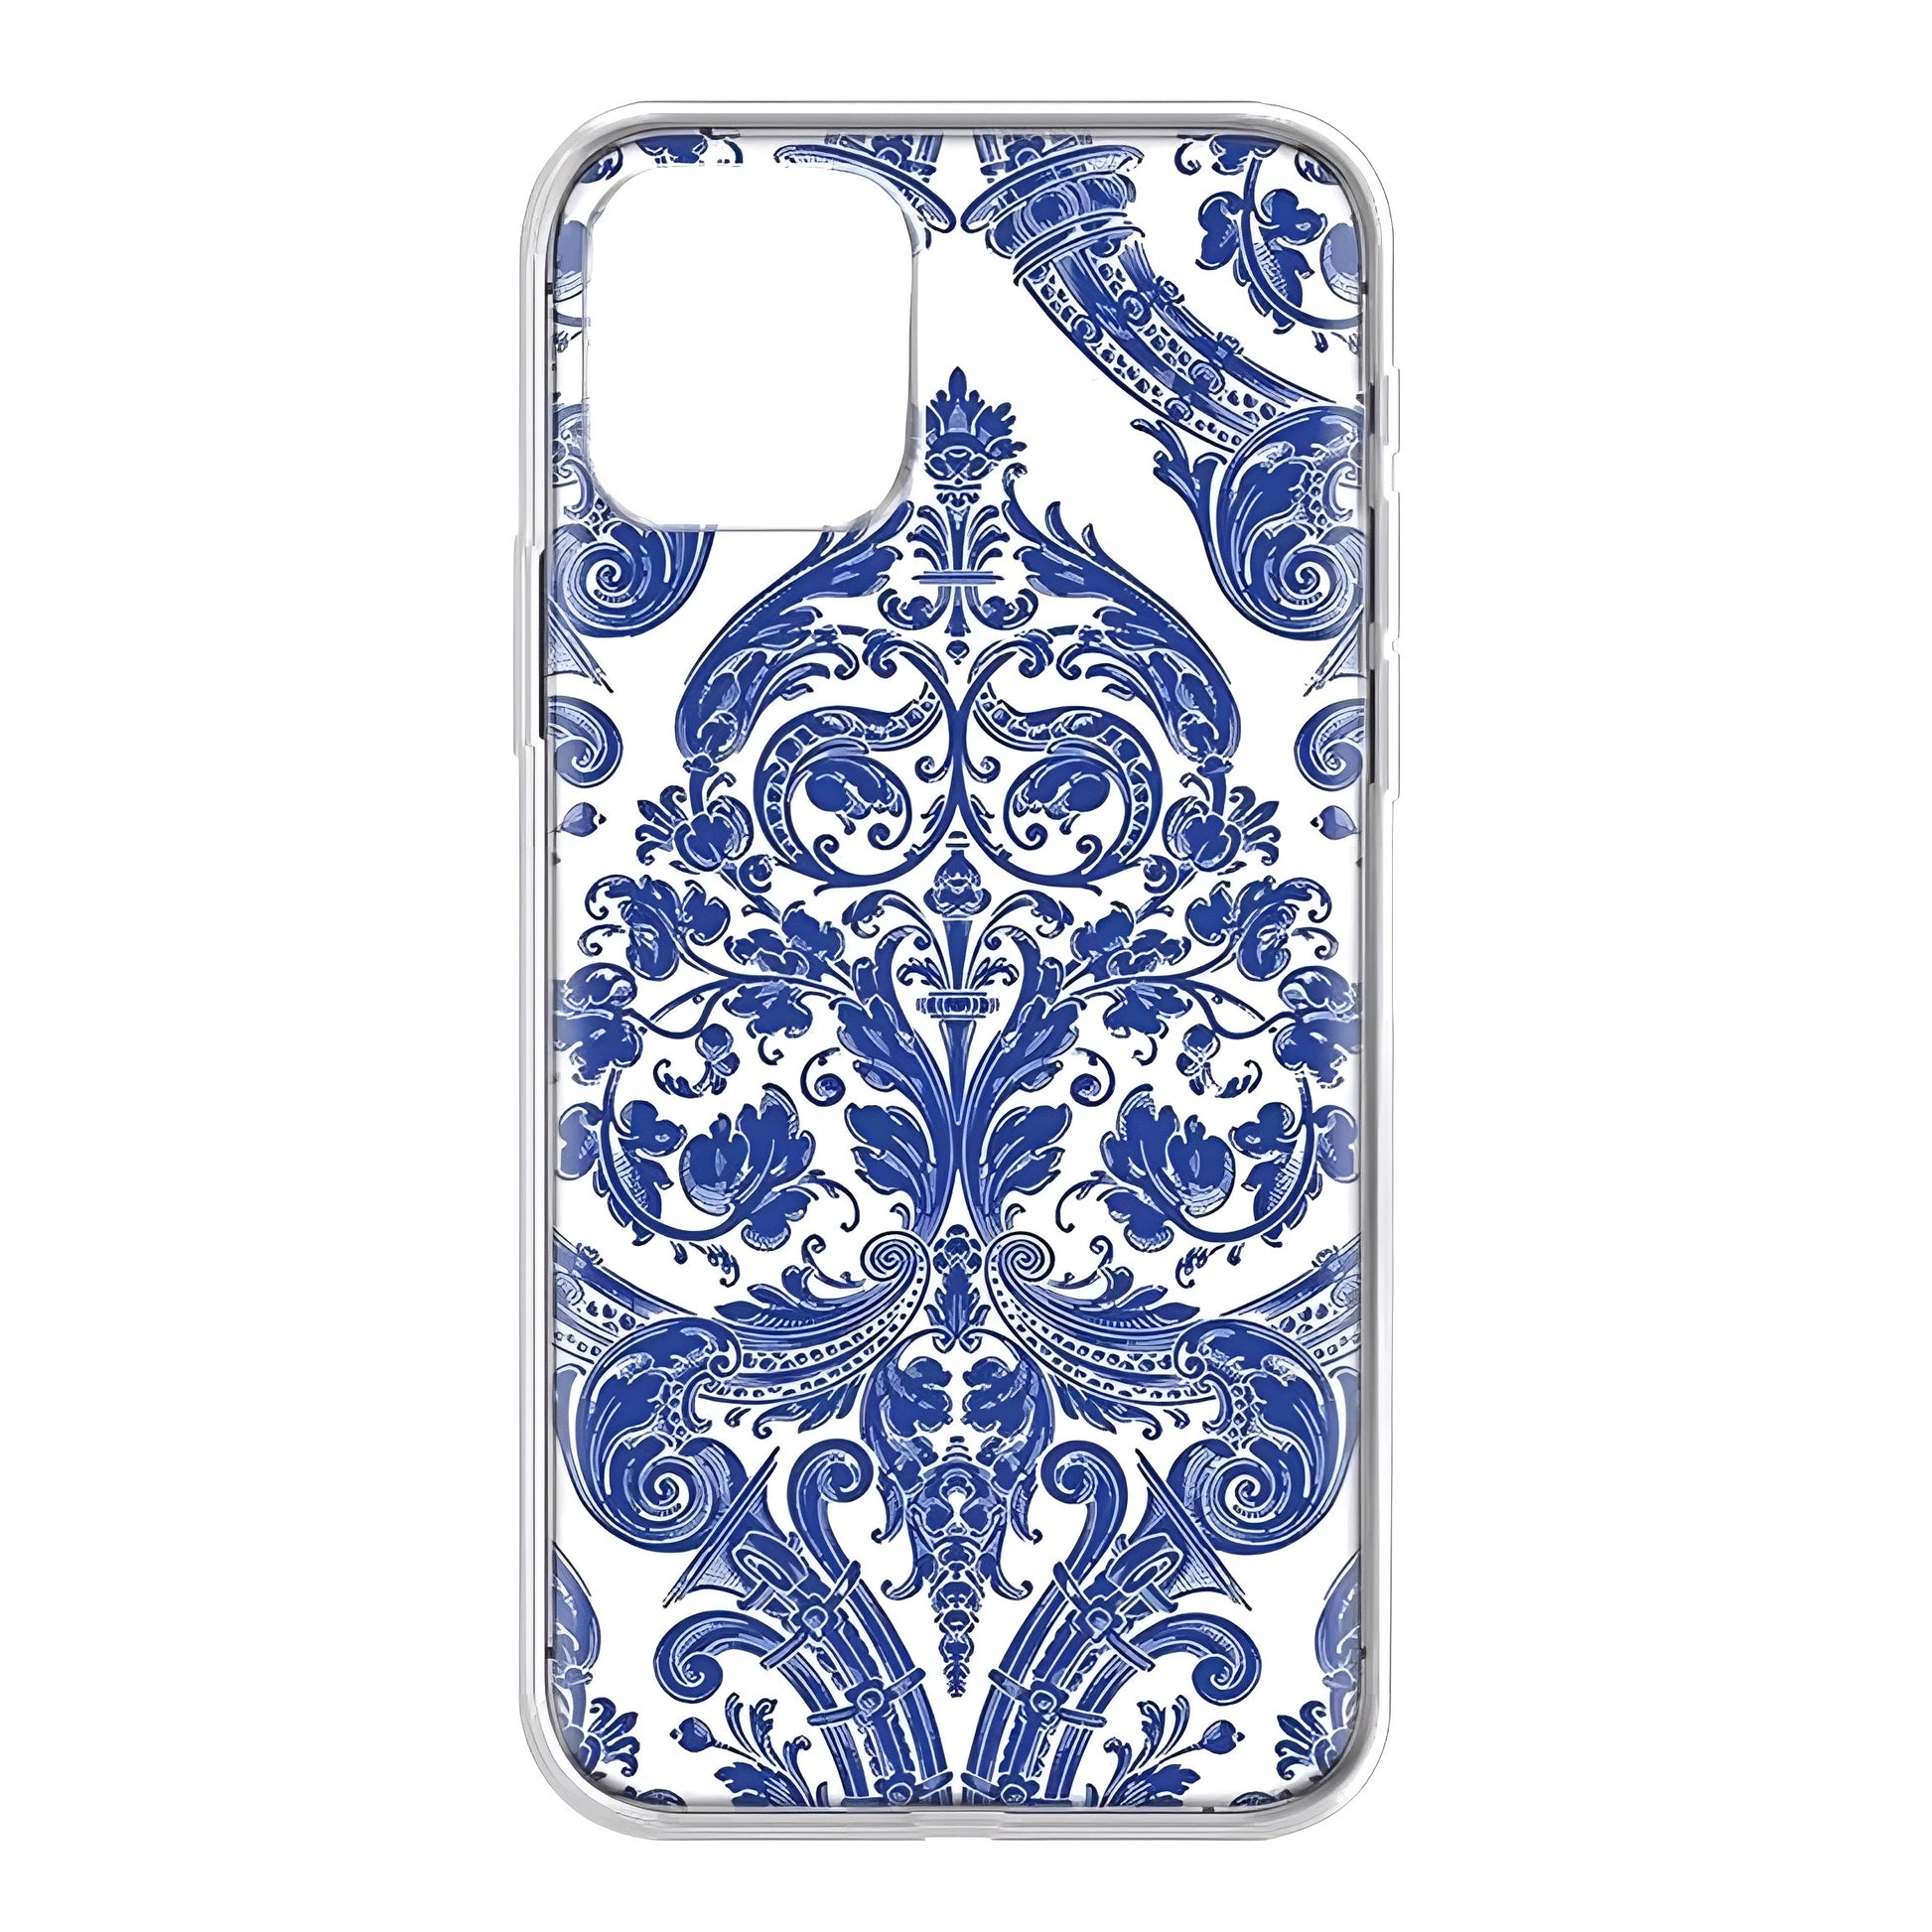 floral-print-dark-navy-blue-and-white-multi-color-flower-patterned-design-hard-plastic-high-quality-shock-proof-phone-case-for-iphone-chic-trendy-women-ladies-girls-spring-2024-summer-feminine-elegant-preppy-coastal-granddaughter-beach-greece-european-vacation-style-wildflower-casetify-dupe